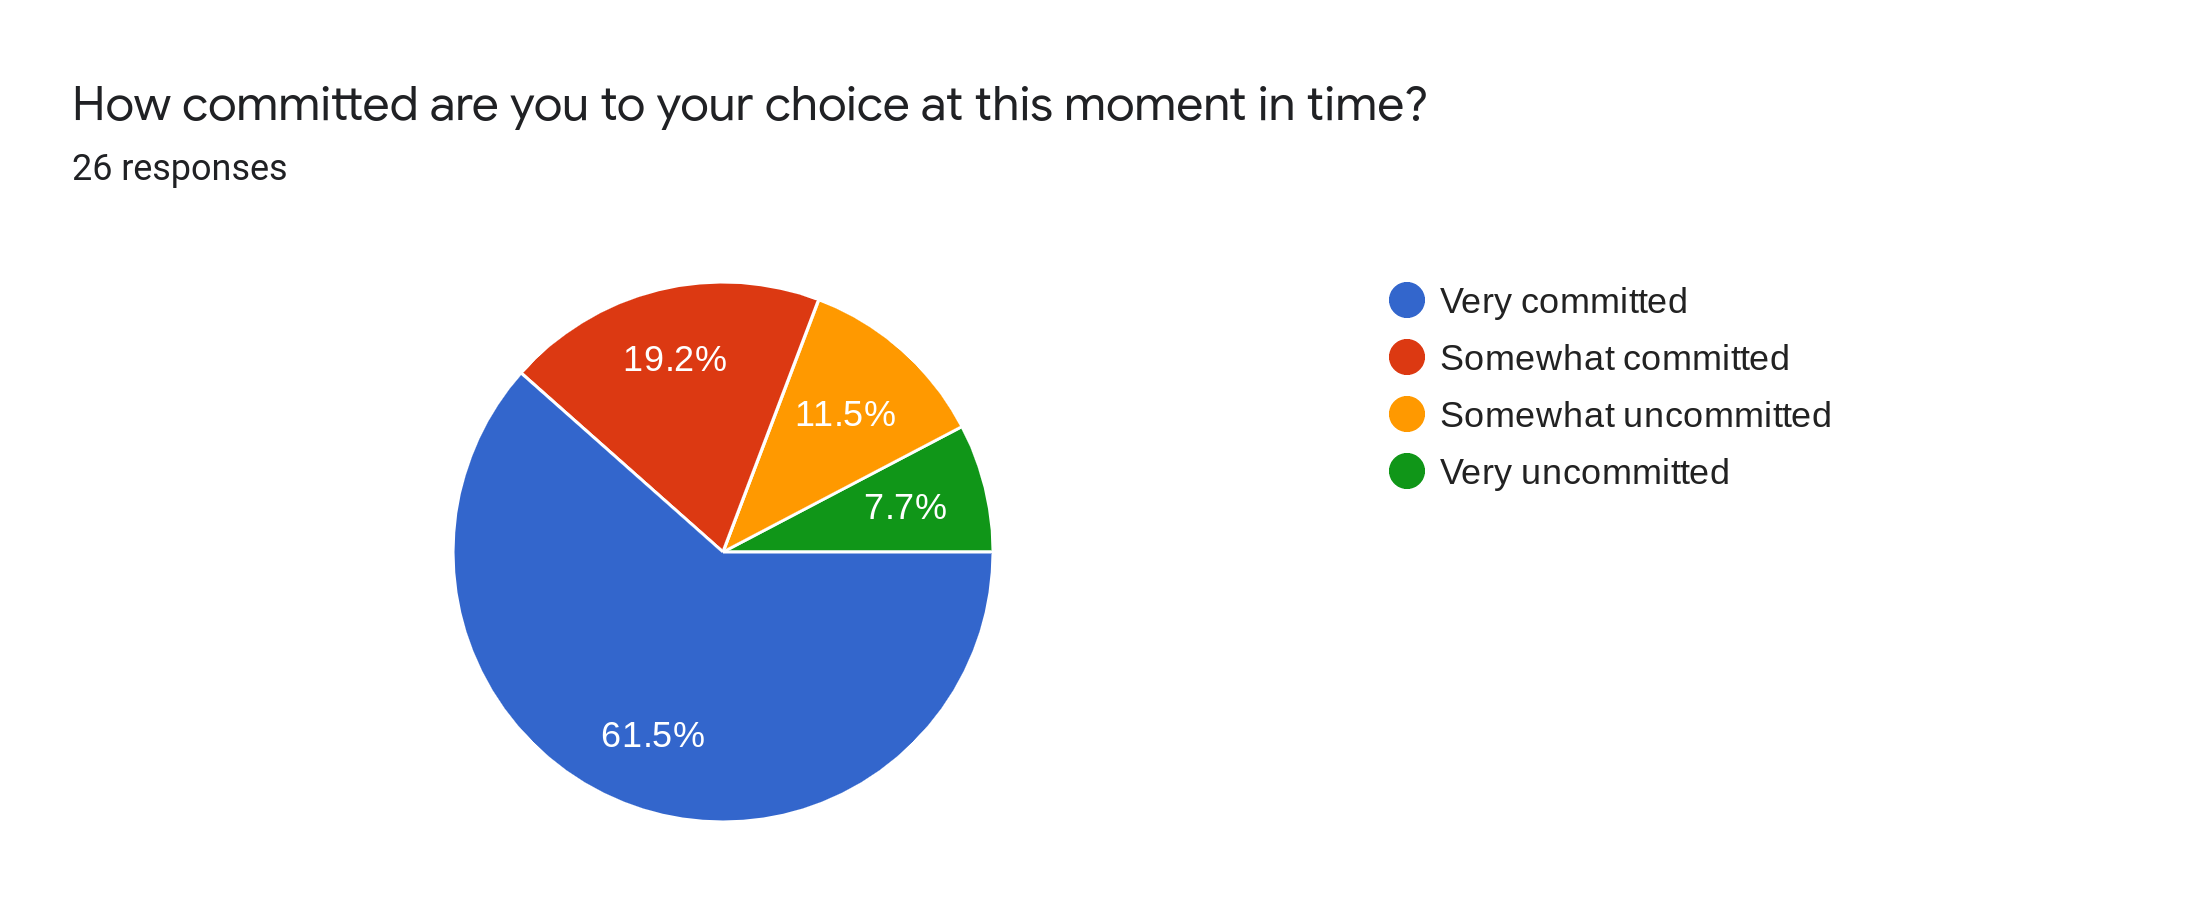 Forms response chart. Question title: How committed are you to your choice at this moment in time?. Number of responses: 26 responses.